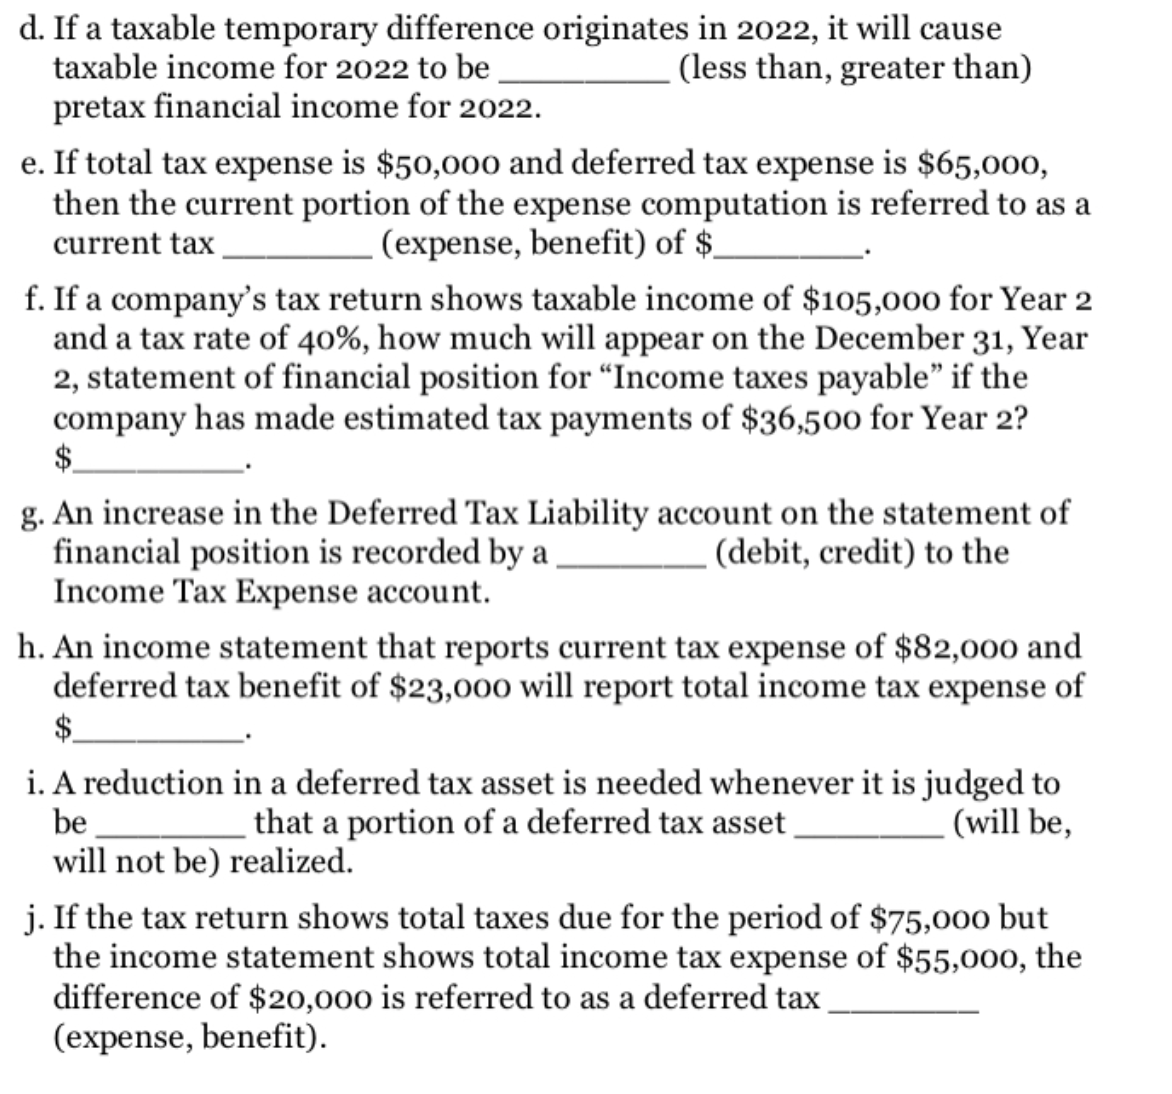 d. If a taxable temporary difference originates in 2022, it will cause
taxable income for 2022 to be
(less than, greater than)
pretax financial income for 2022.
e. If total tax expense is $50,000 and deferred tax expense is $65,000,
then the current portion of the expense computation is referred to as a
.(expense, benefit) of $-
current tax
f. If a company's tax return shows taxable income of $105,000 for Year 2
and a tax rate of 40%, how much will appear on the December 31, Year
2, statement of financial position for “Income taxes payable" if the
company has made estimated tax payments of $36,500 for Year 2?
$.
g. An increase in the Deferred Tax Liability account on the statement of
financial position is recorded by a
Income Tax Expense account.
. (debit, credit) to the
h. An income statement that reports current tax expense of $82,000 and
deferred tax benefit of $23,000 will report total income tax expense of
$.
i. A reduction in a deferred tax asset is needed whenever it is judged to
that a portion of a deferred tax asset
be
will not be) realized.
- (will be,
j. If the tax return shows total taxes due for the period of $75,000 but
the income statement shows total income tax expense of $55,000, the
difference of $20,000 is referred to as a deferred tax
(expense, benefit).
